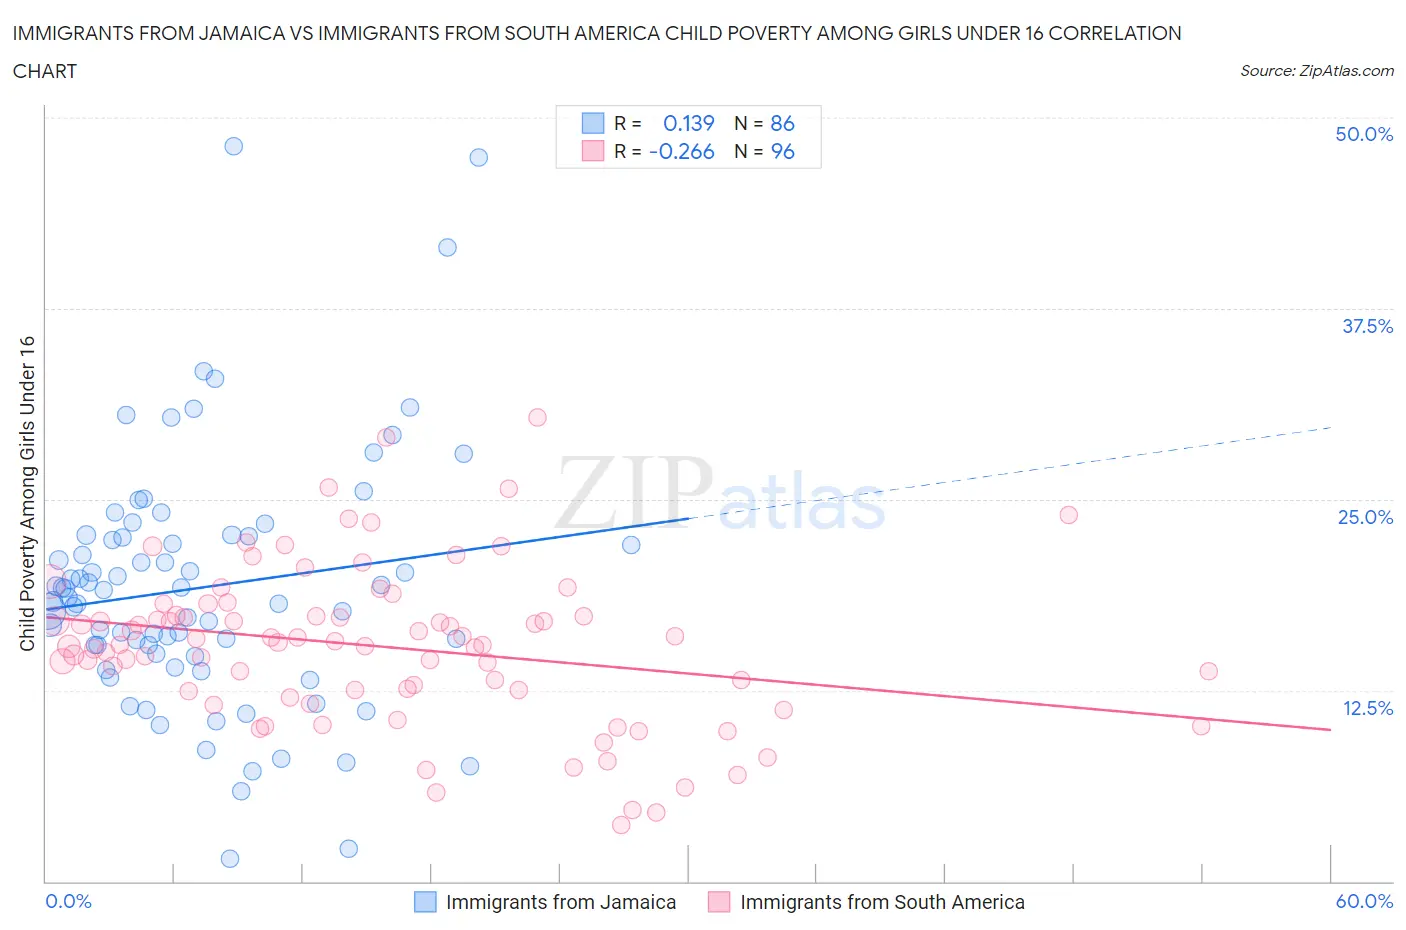 Immigrants from Jamaica vs Immigrants from South America Child Poverty Among Girls Under 16